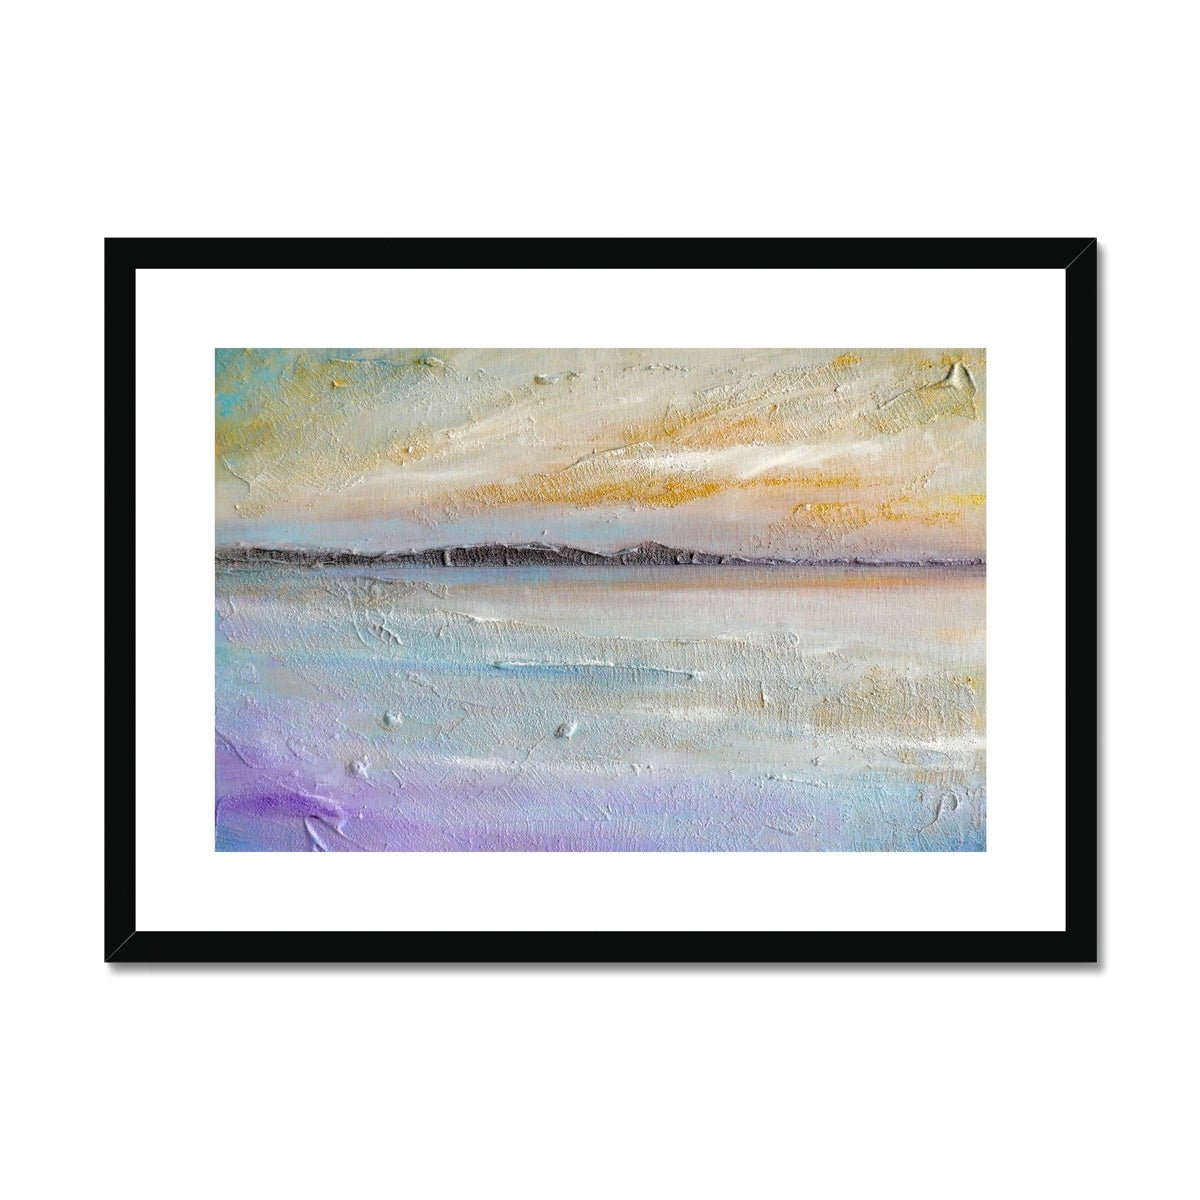 Sollas Beach North Uist Painting | Framed & Mounted Prints From Scotland-Framed & Mounted Prints-Hebridean Islands Art Gallery-A2 Landscape-Black Frame-Paintings, Prints, Homeware, Art Gifts From Scotland By Scottish Artist Kevin Hunter